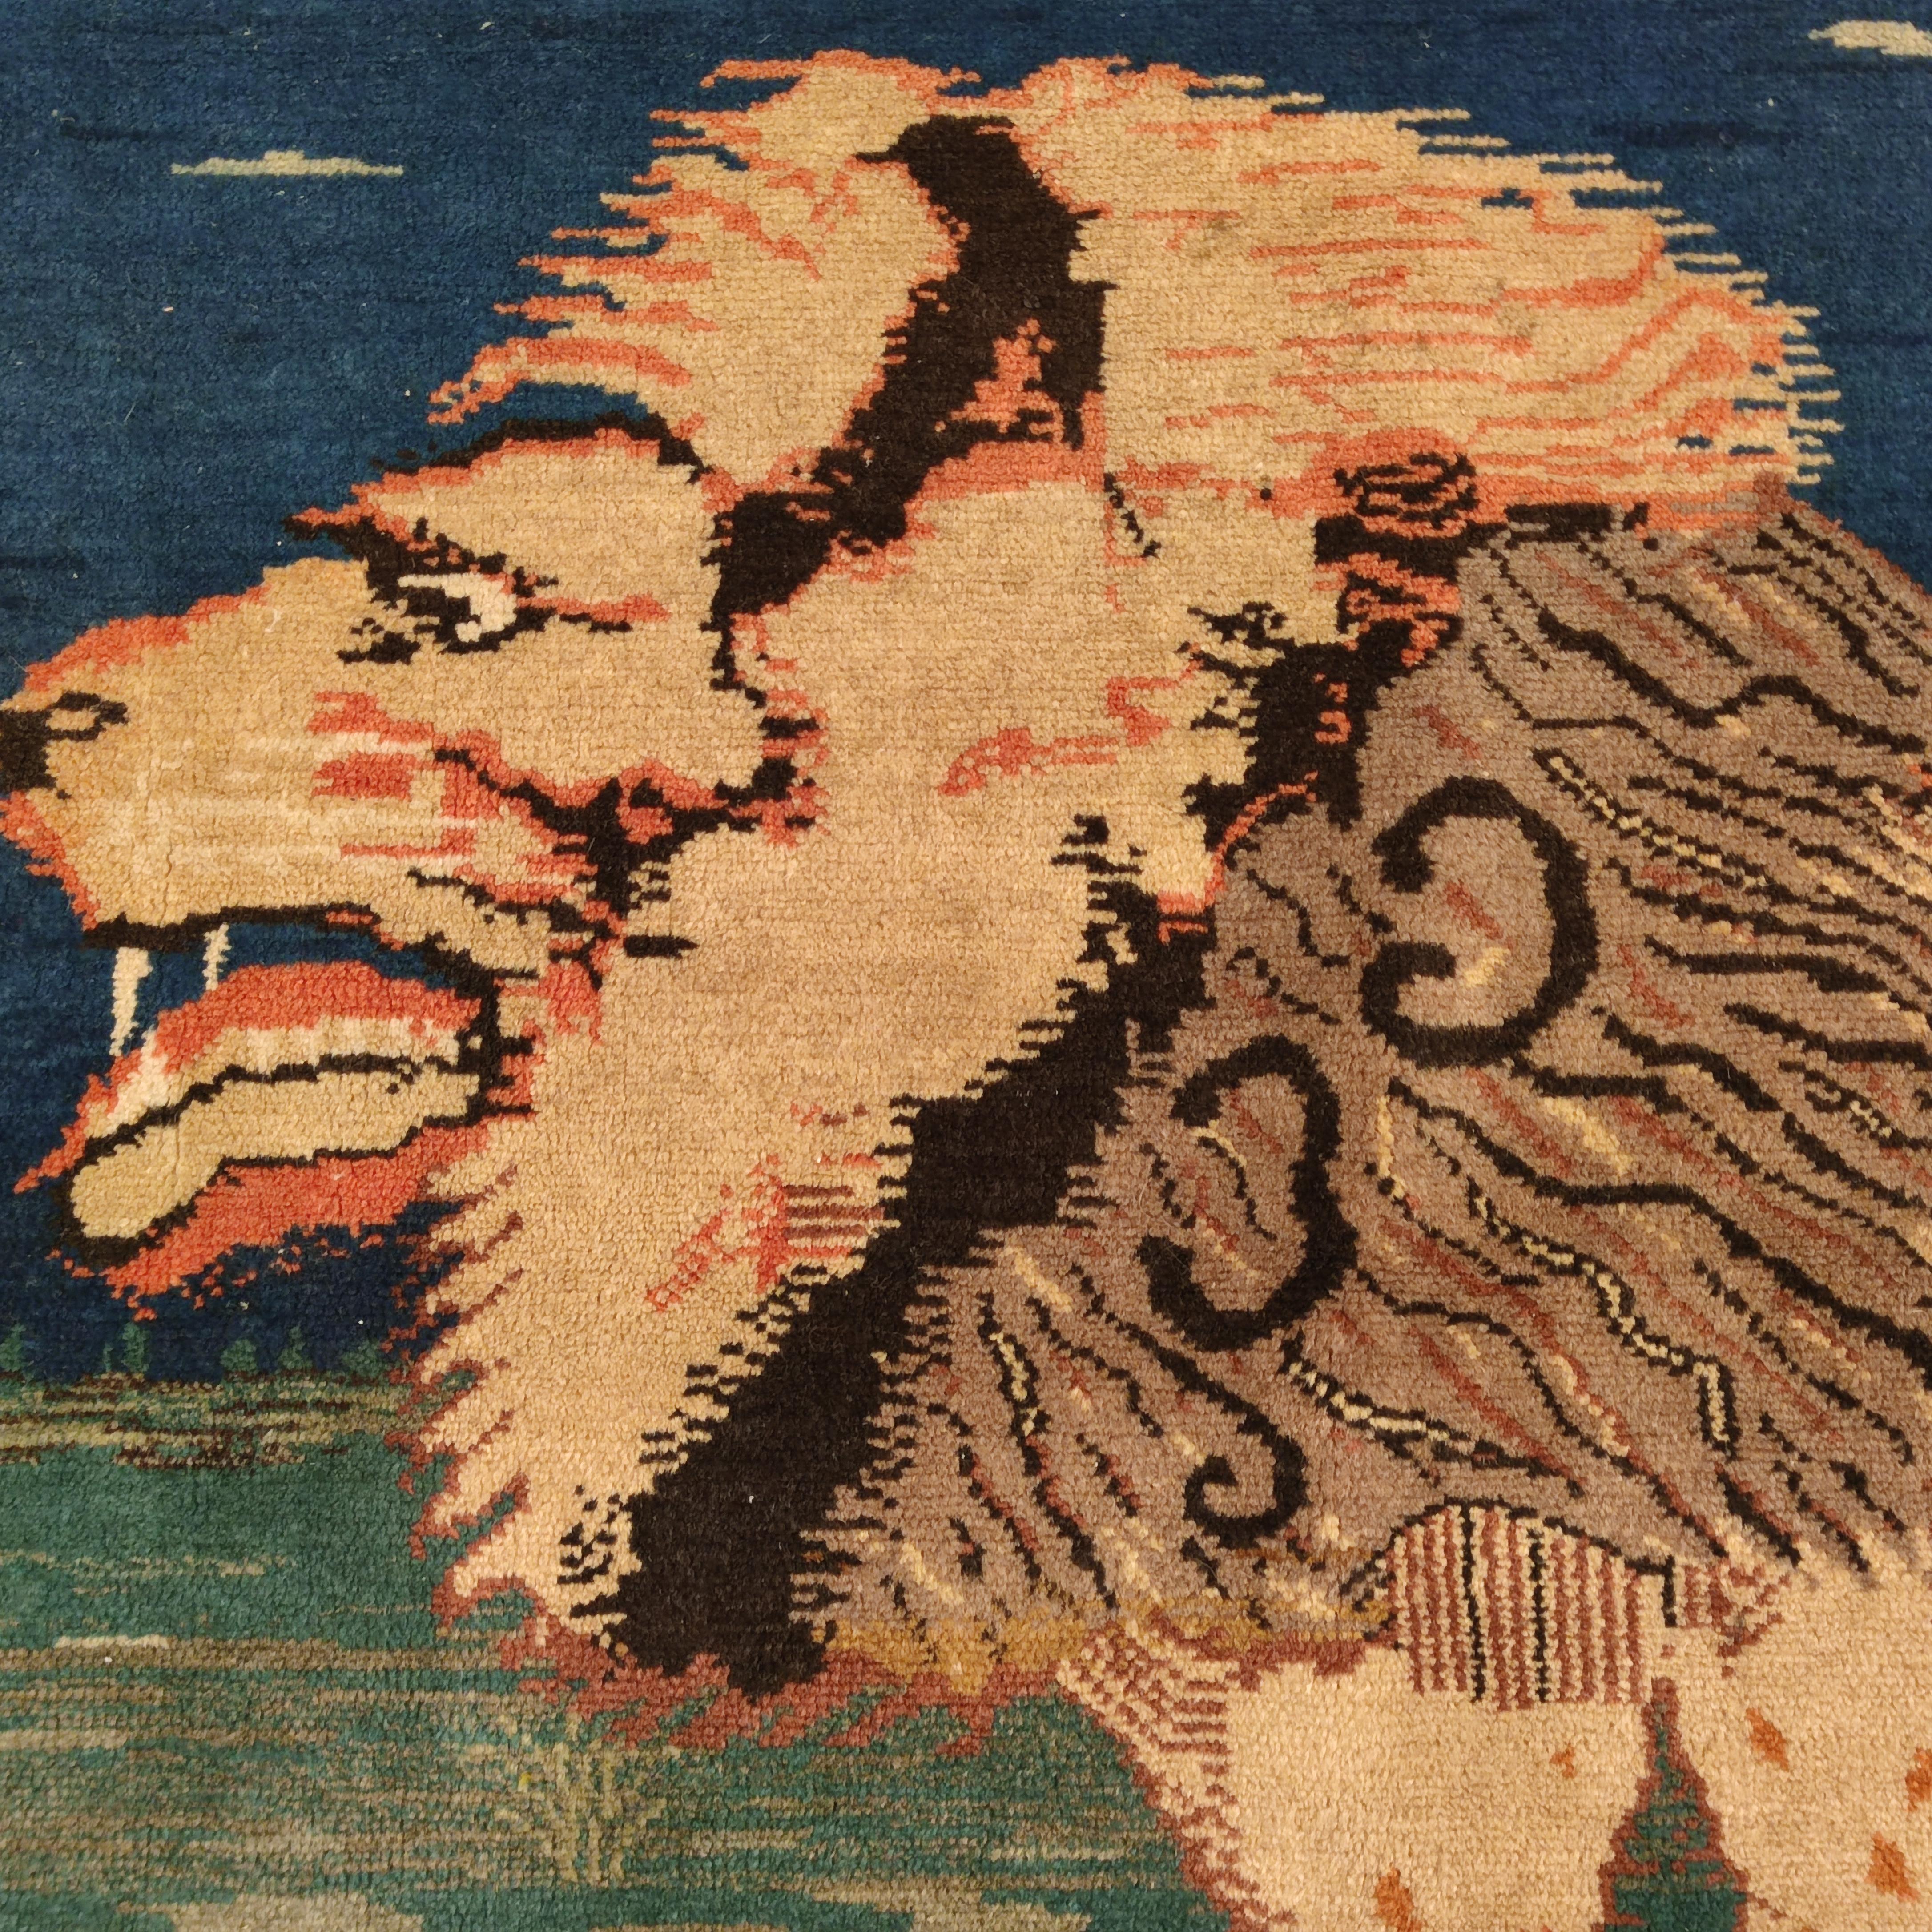 Hand-Knotted Pictorial Caucasian Lion Rug Signed Zolfi Oghly Rajab, Shirvan, Dated 1955